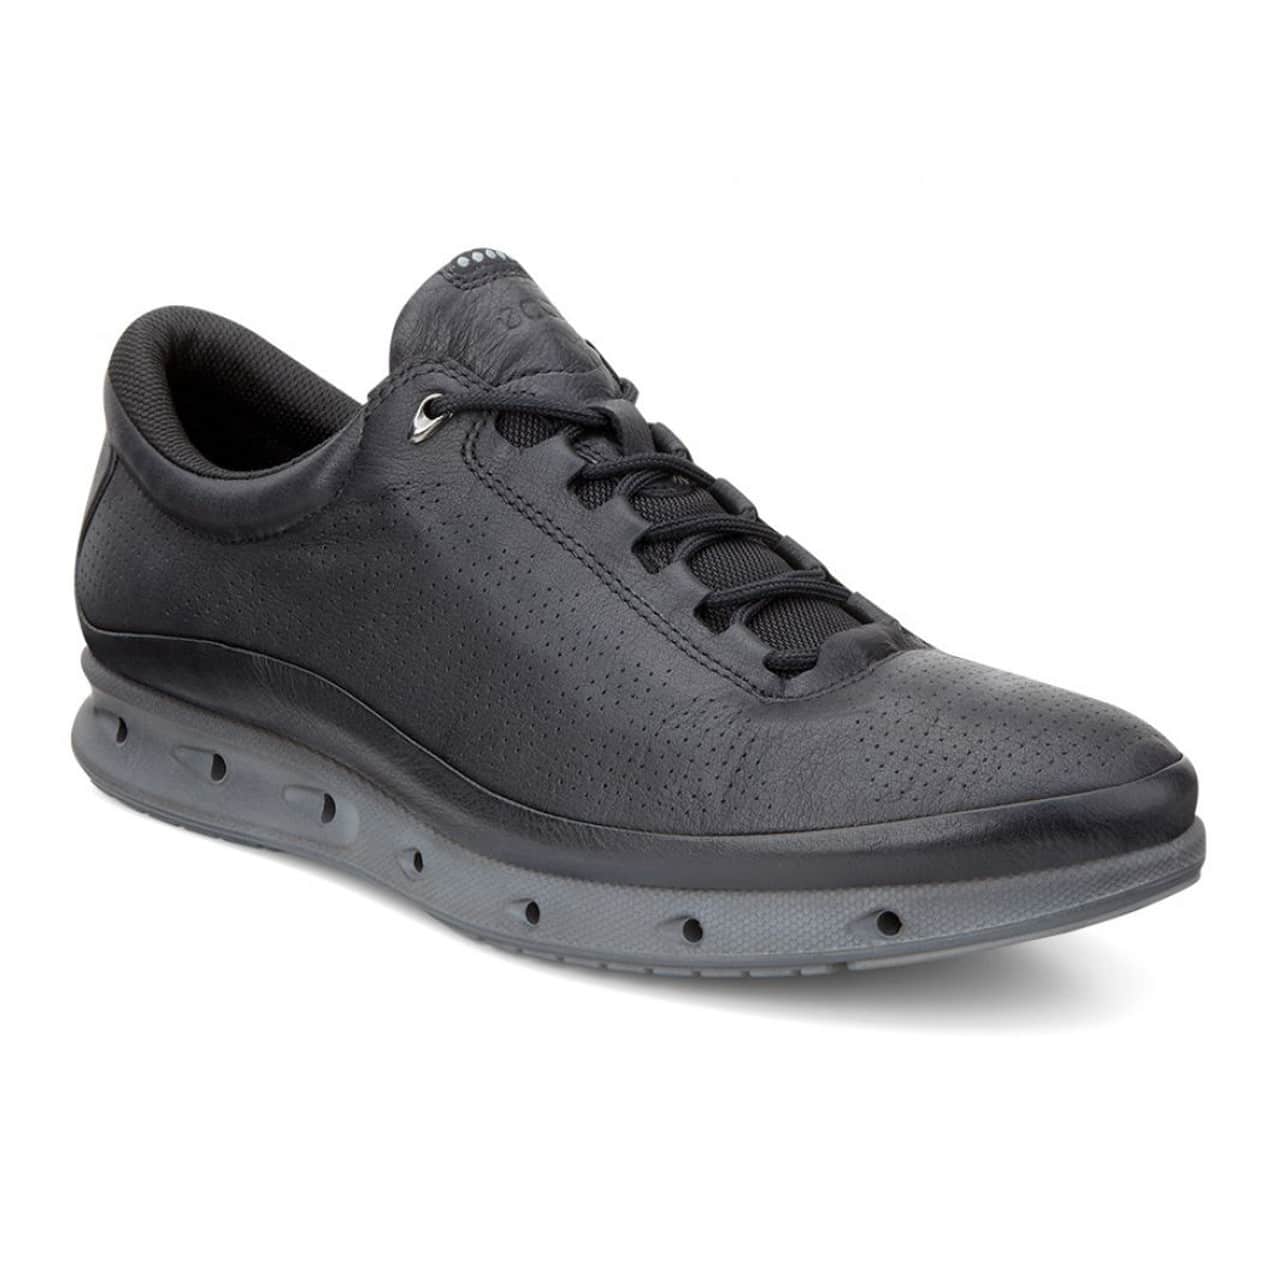 Ecco Cool - 121 Shoes